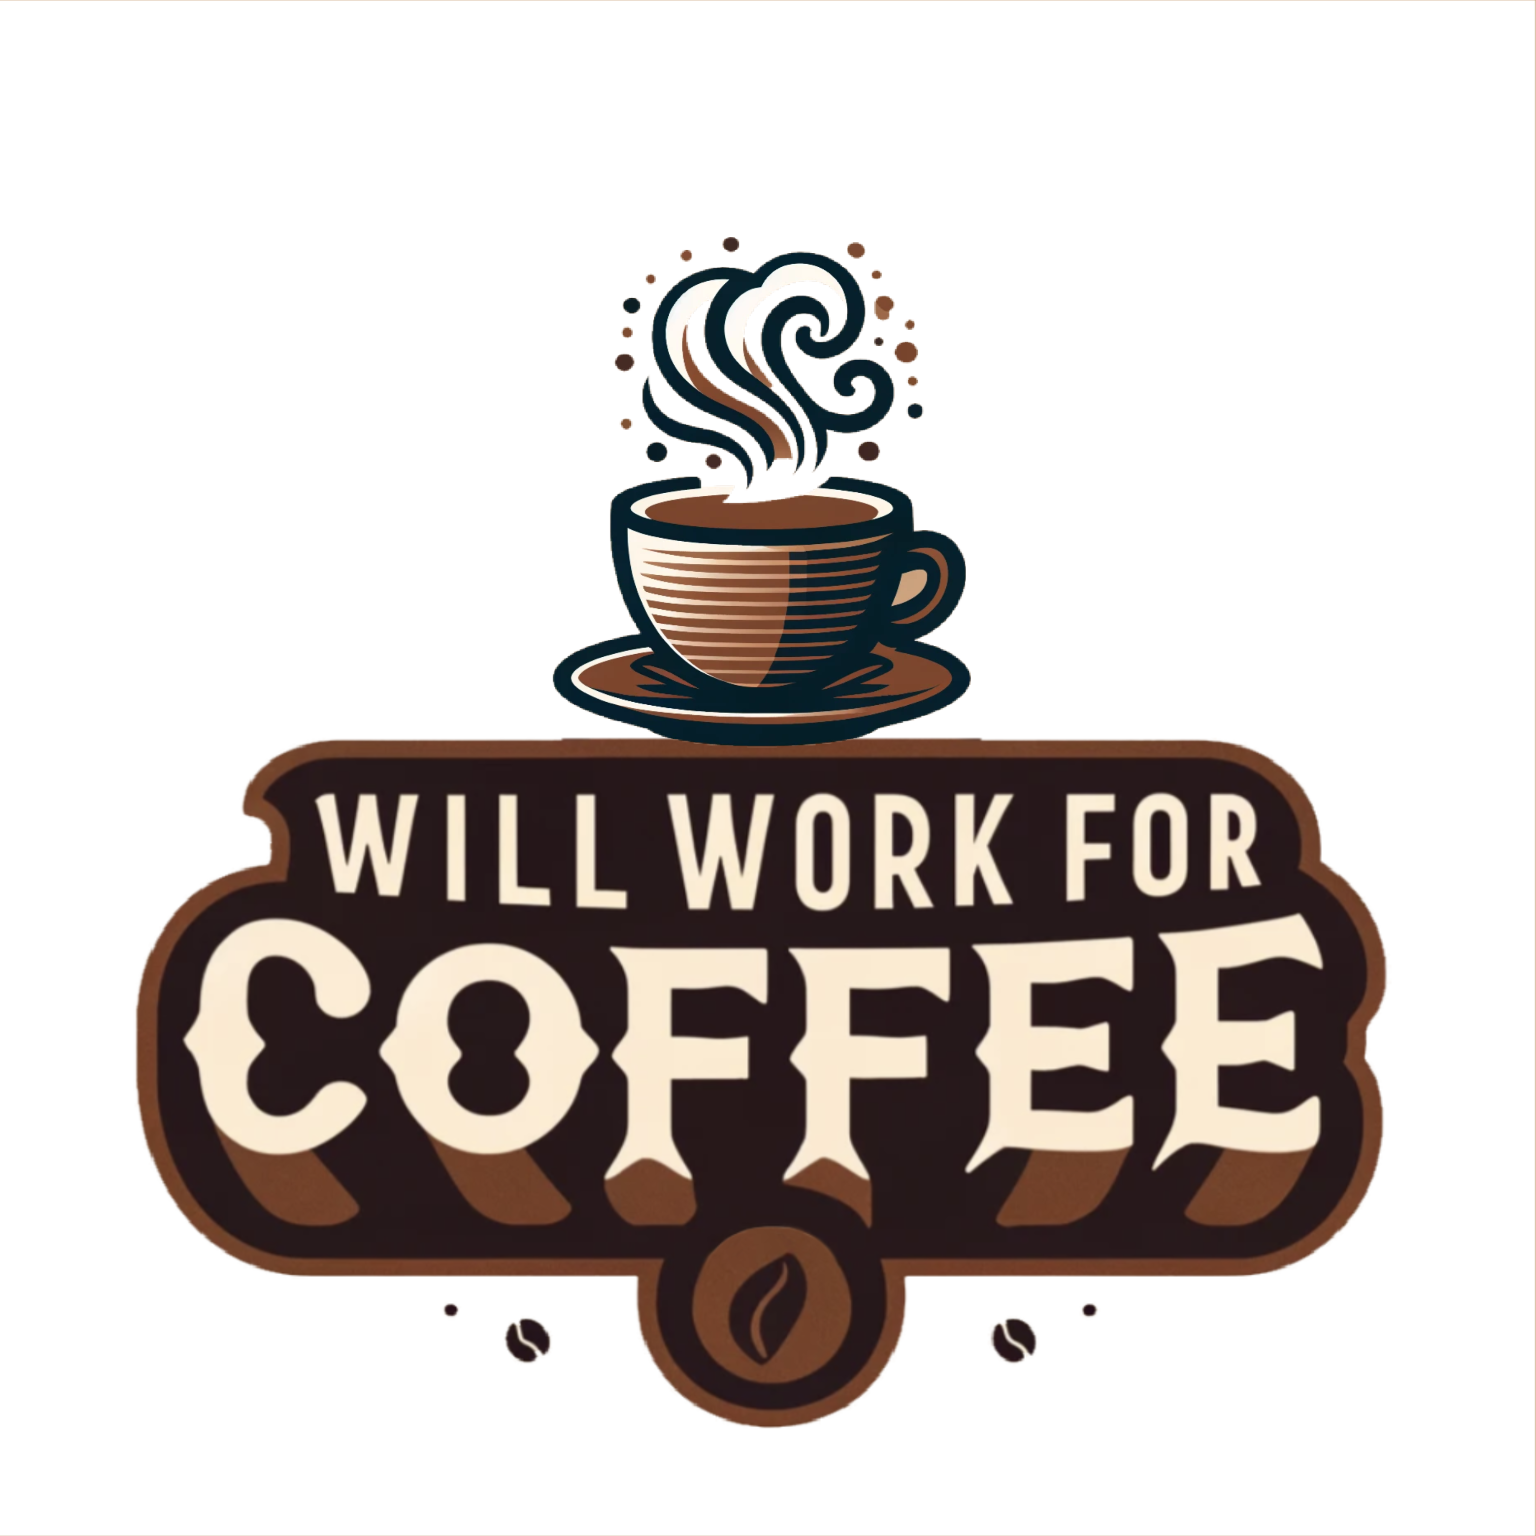 "Will work for Coffee" logo featuring graphic of a steaming cup of coffee